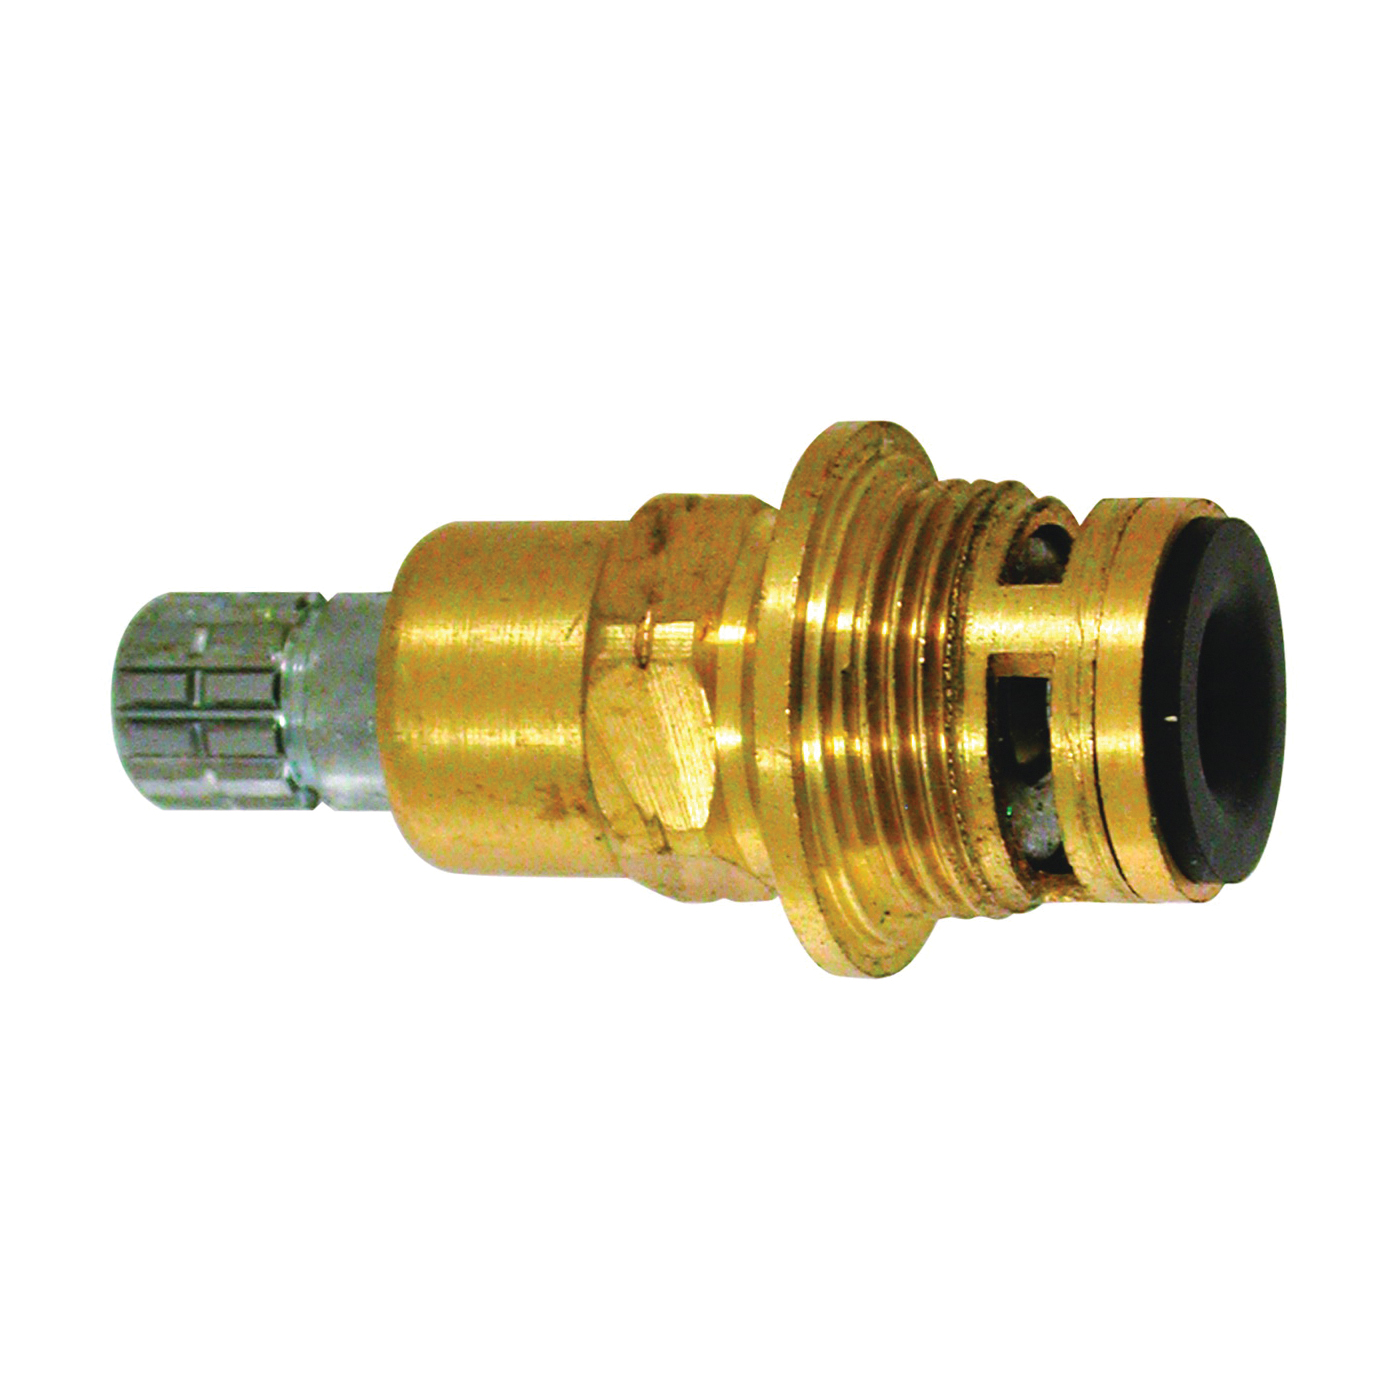 18533E Faucet Stem, Brass, 1-59/64 in L, For: Price Pfister Two Handle Kitchen and Bathroom Sink Faucets